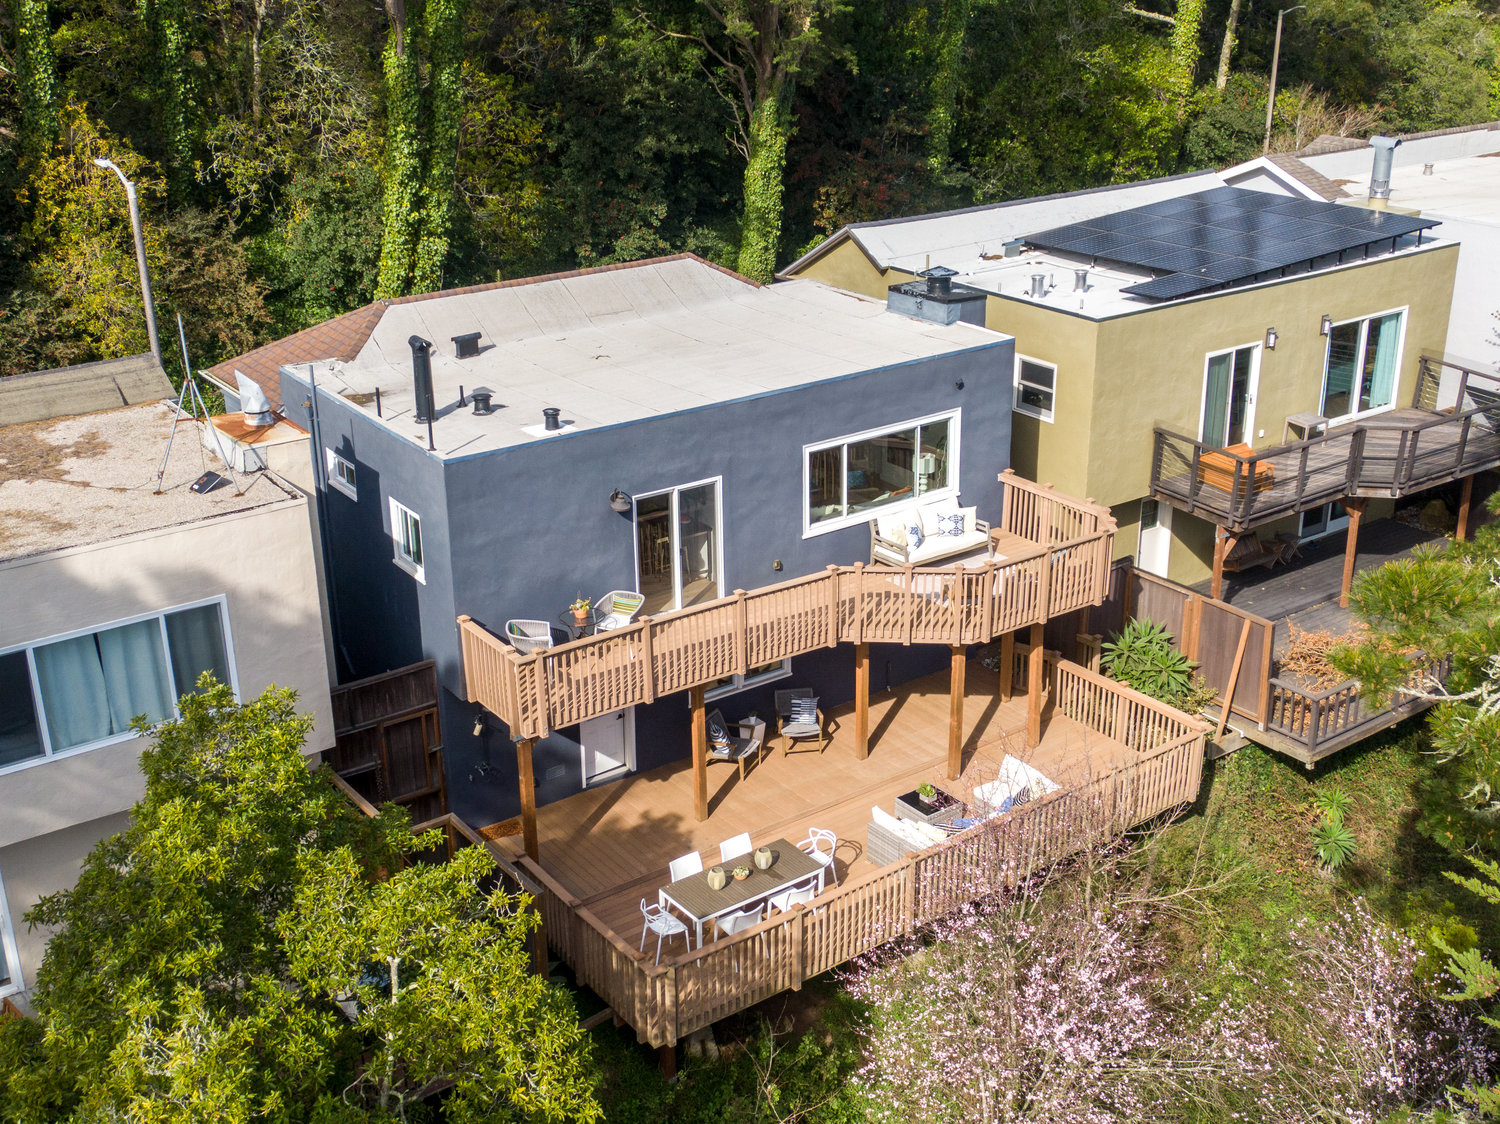 Property Photo: Aerial view of the home, showing double decks